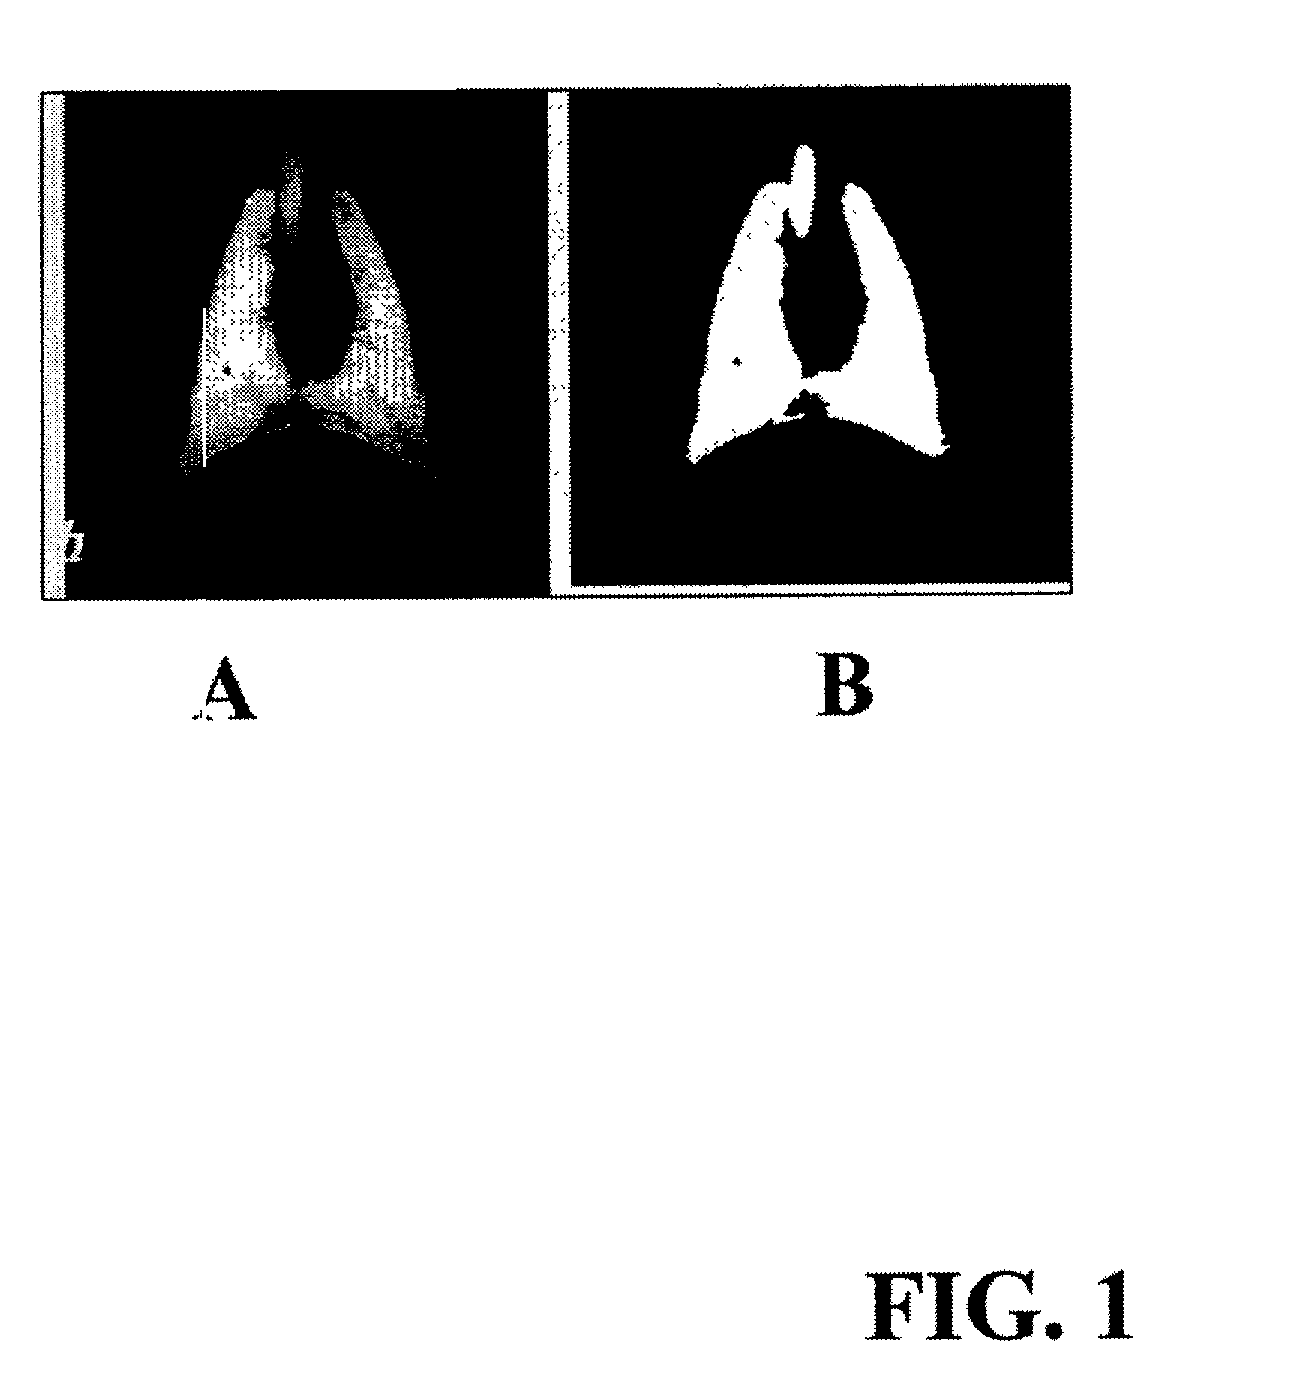 Equilibration method for high resolution imaging of lung compliance and distribution of functional residual capacity